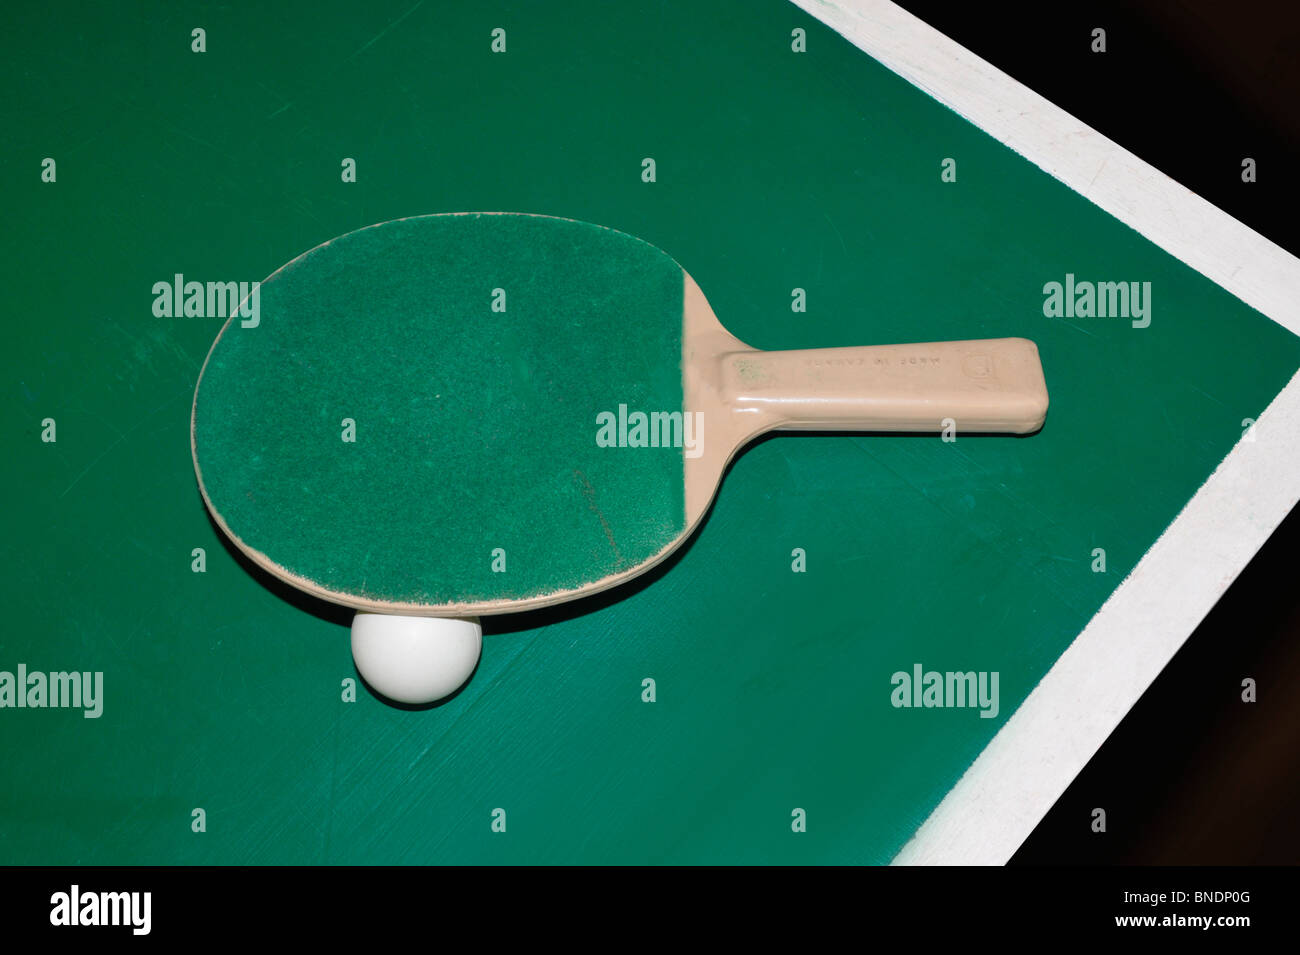 A table tennis bat and ball sit on the edge of a table tennis table. Stock Photo